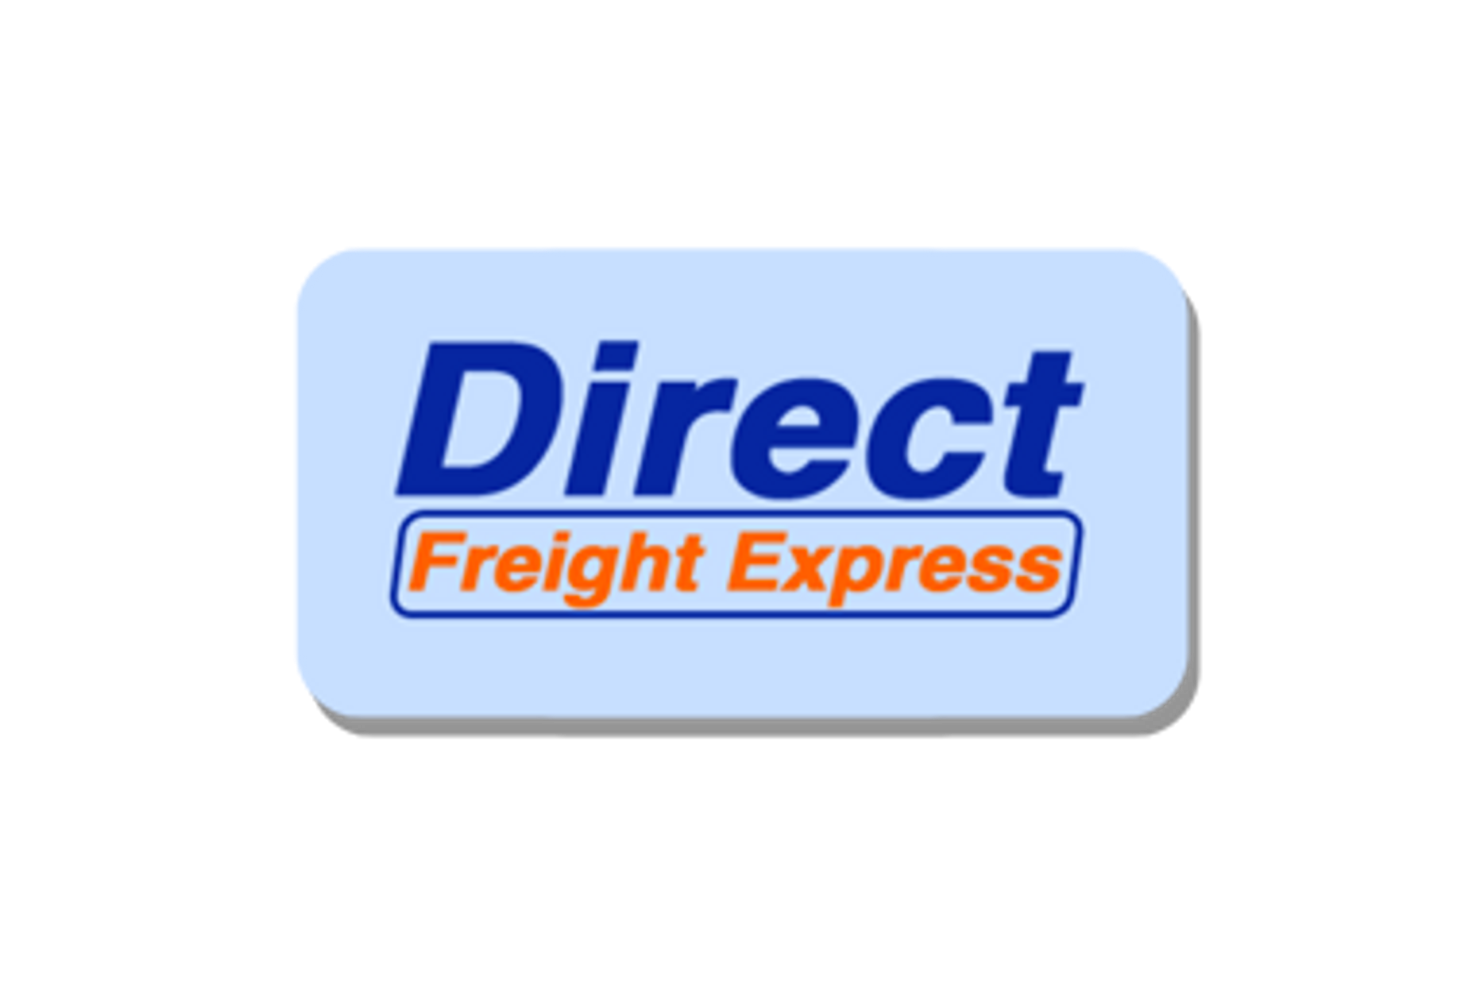 Direct Freight Express tile logo shadow